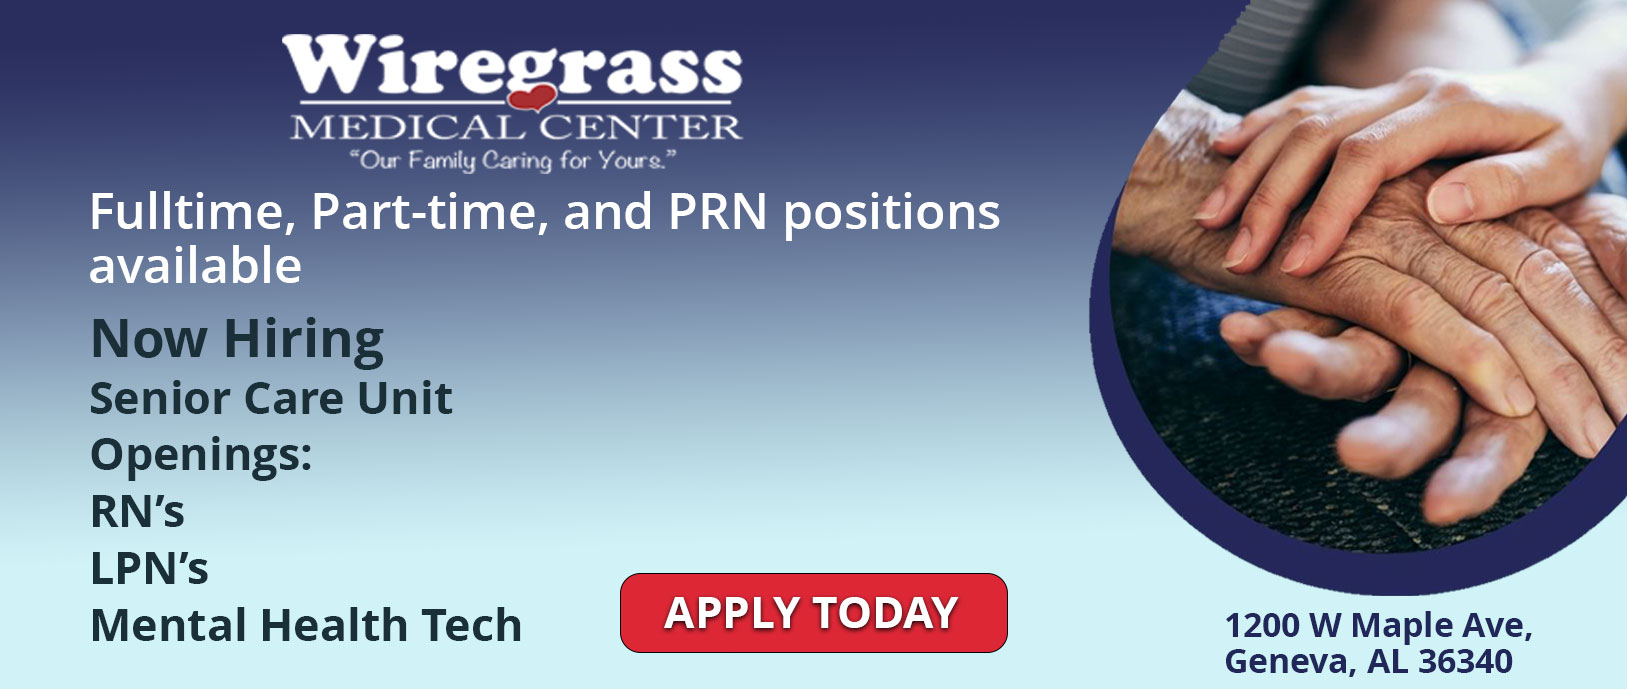 Banner picture of a female Nurses hand touching an elderly patient males hand. Banner says:
Fulltime, Part-time, and PRN positions available
Now Hiring
Senior Care Unit
Openings:
RN's
LPN's
Mental Health Tech

1200 W Maple Ave, 
Geneva, AL 36340

(APPLY TODAY)